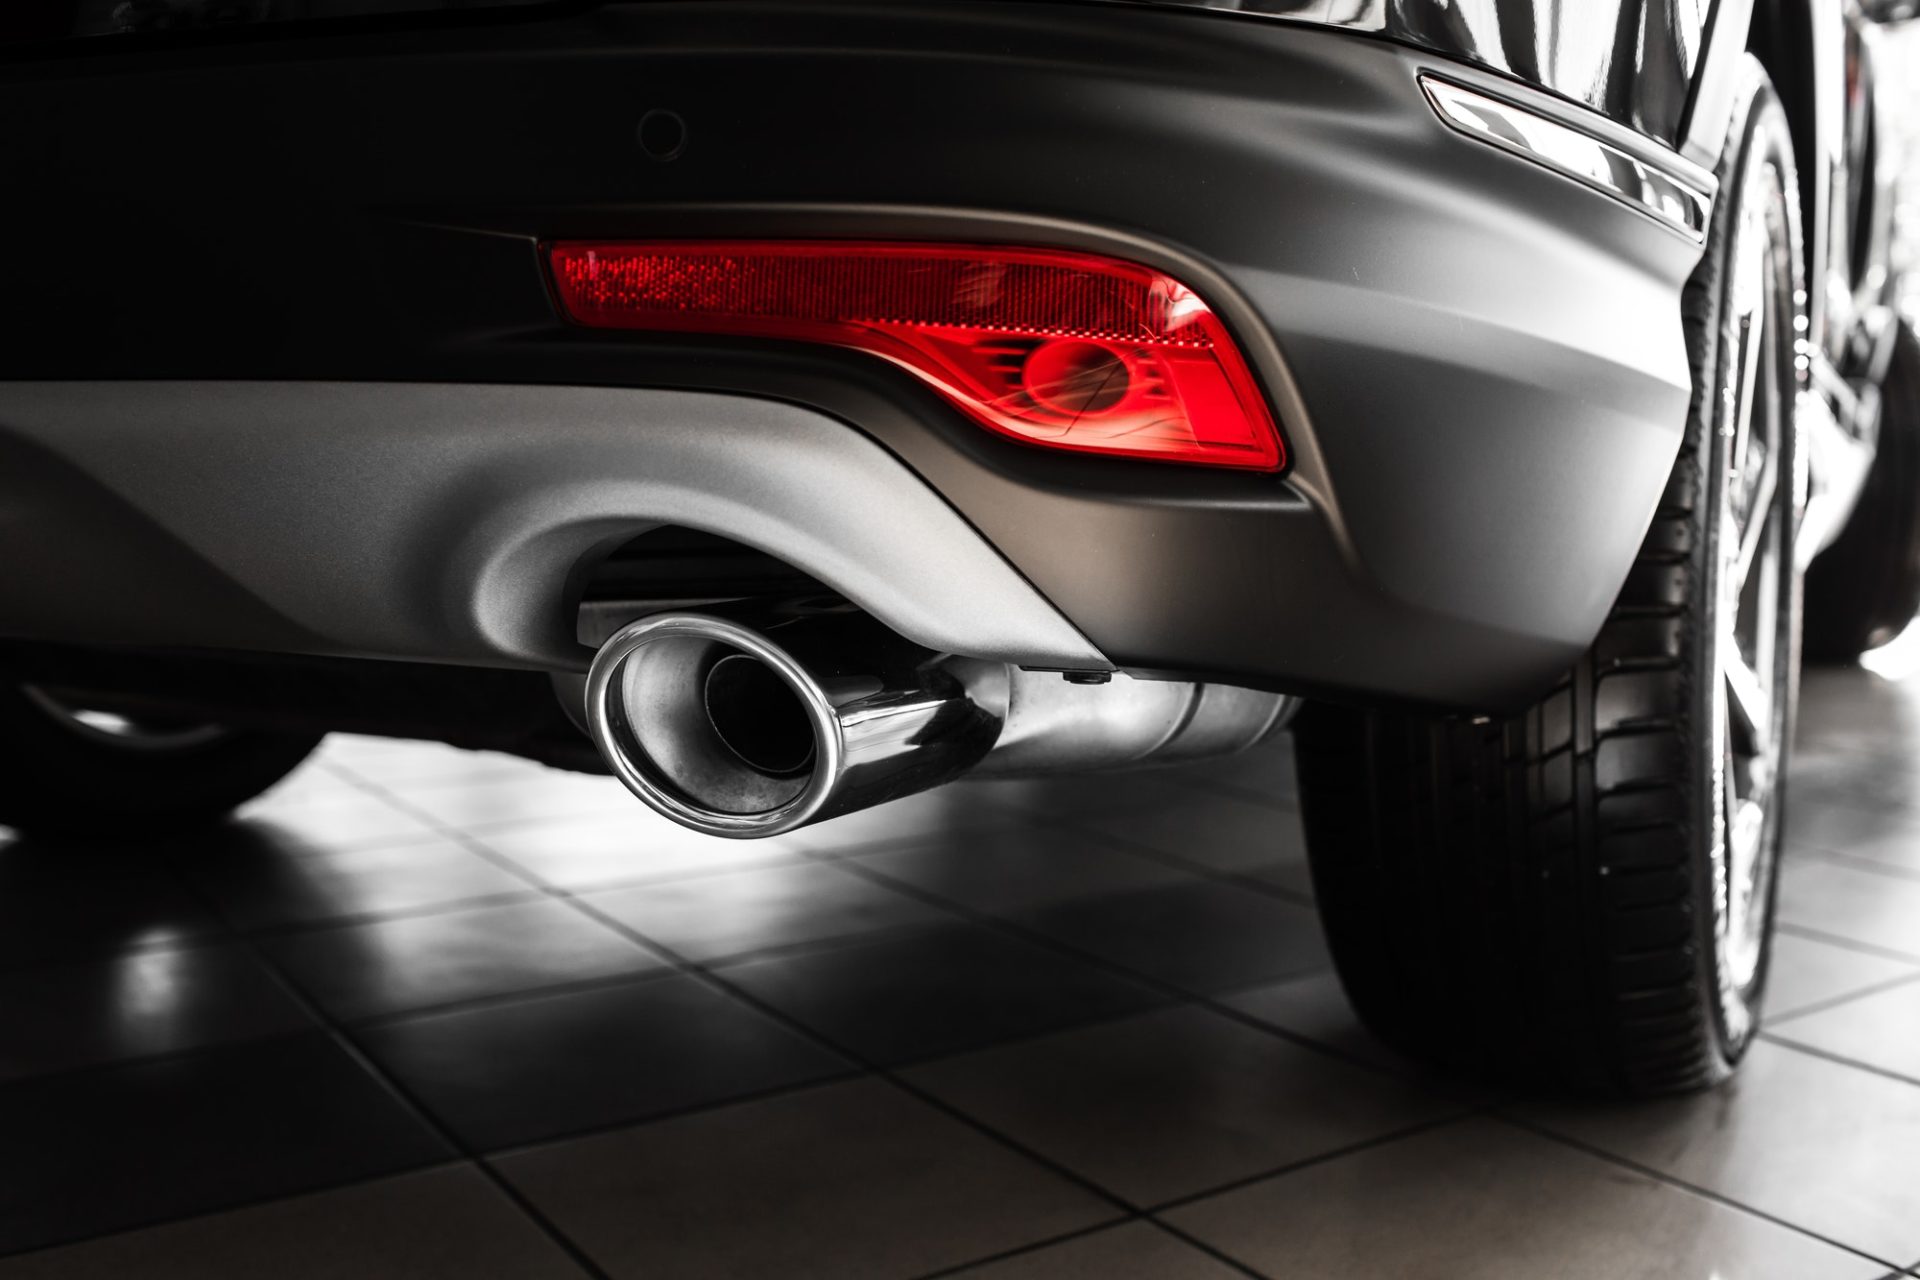 luxury car. Tailpipe chromed made of stainless steel on powerful sport car bumper.